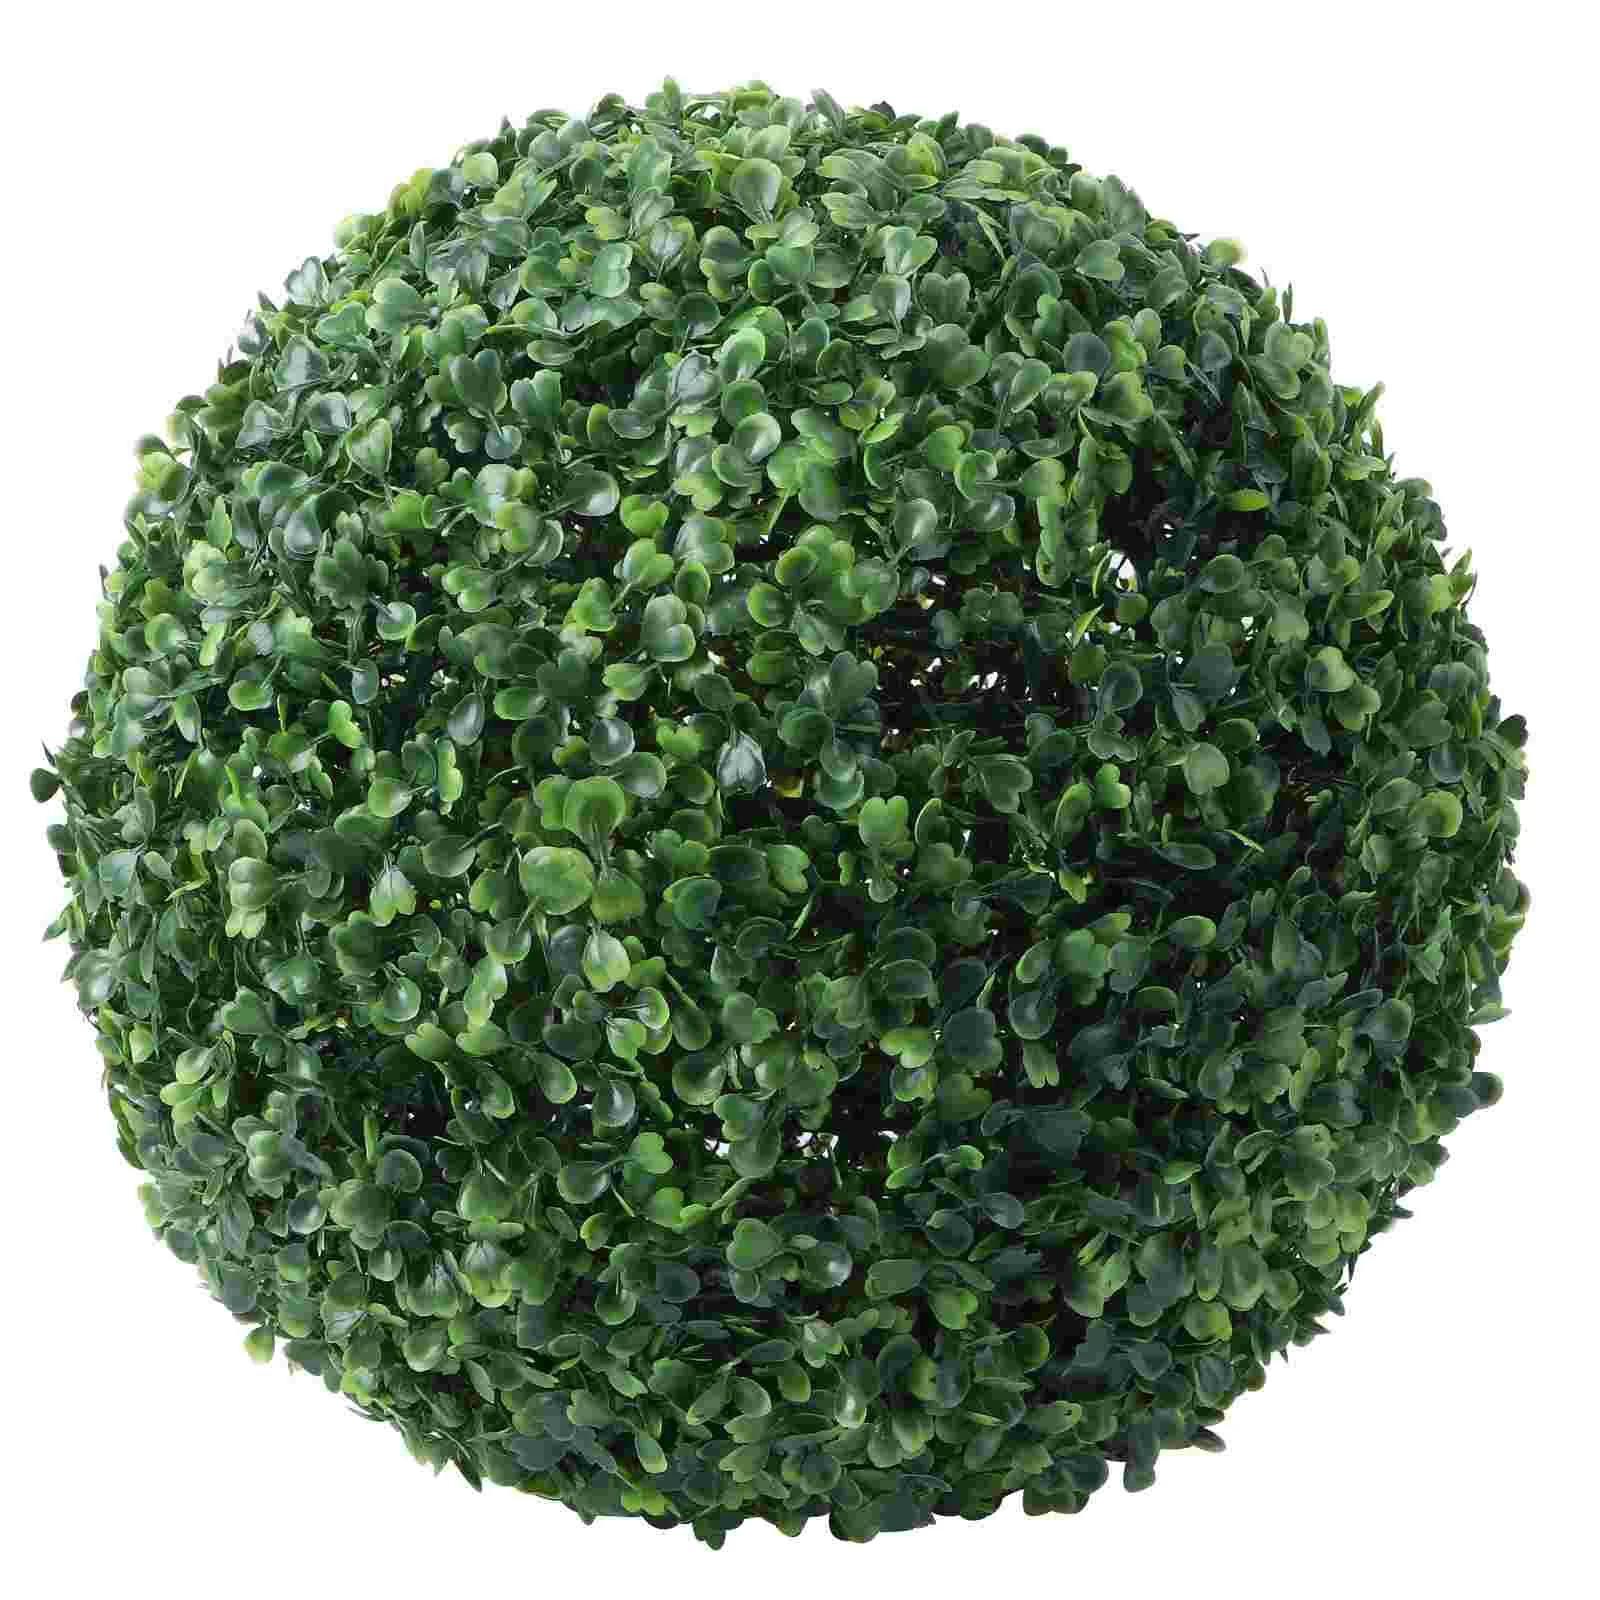 

Topiary Artificial Boxwood Grass Hanging Faux Decorative Outdoor Ornament Fake Ceiling Simulated Greenery Decor Green Simulation